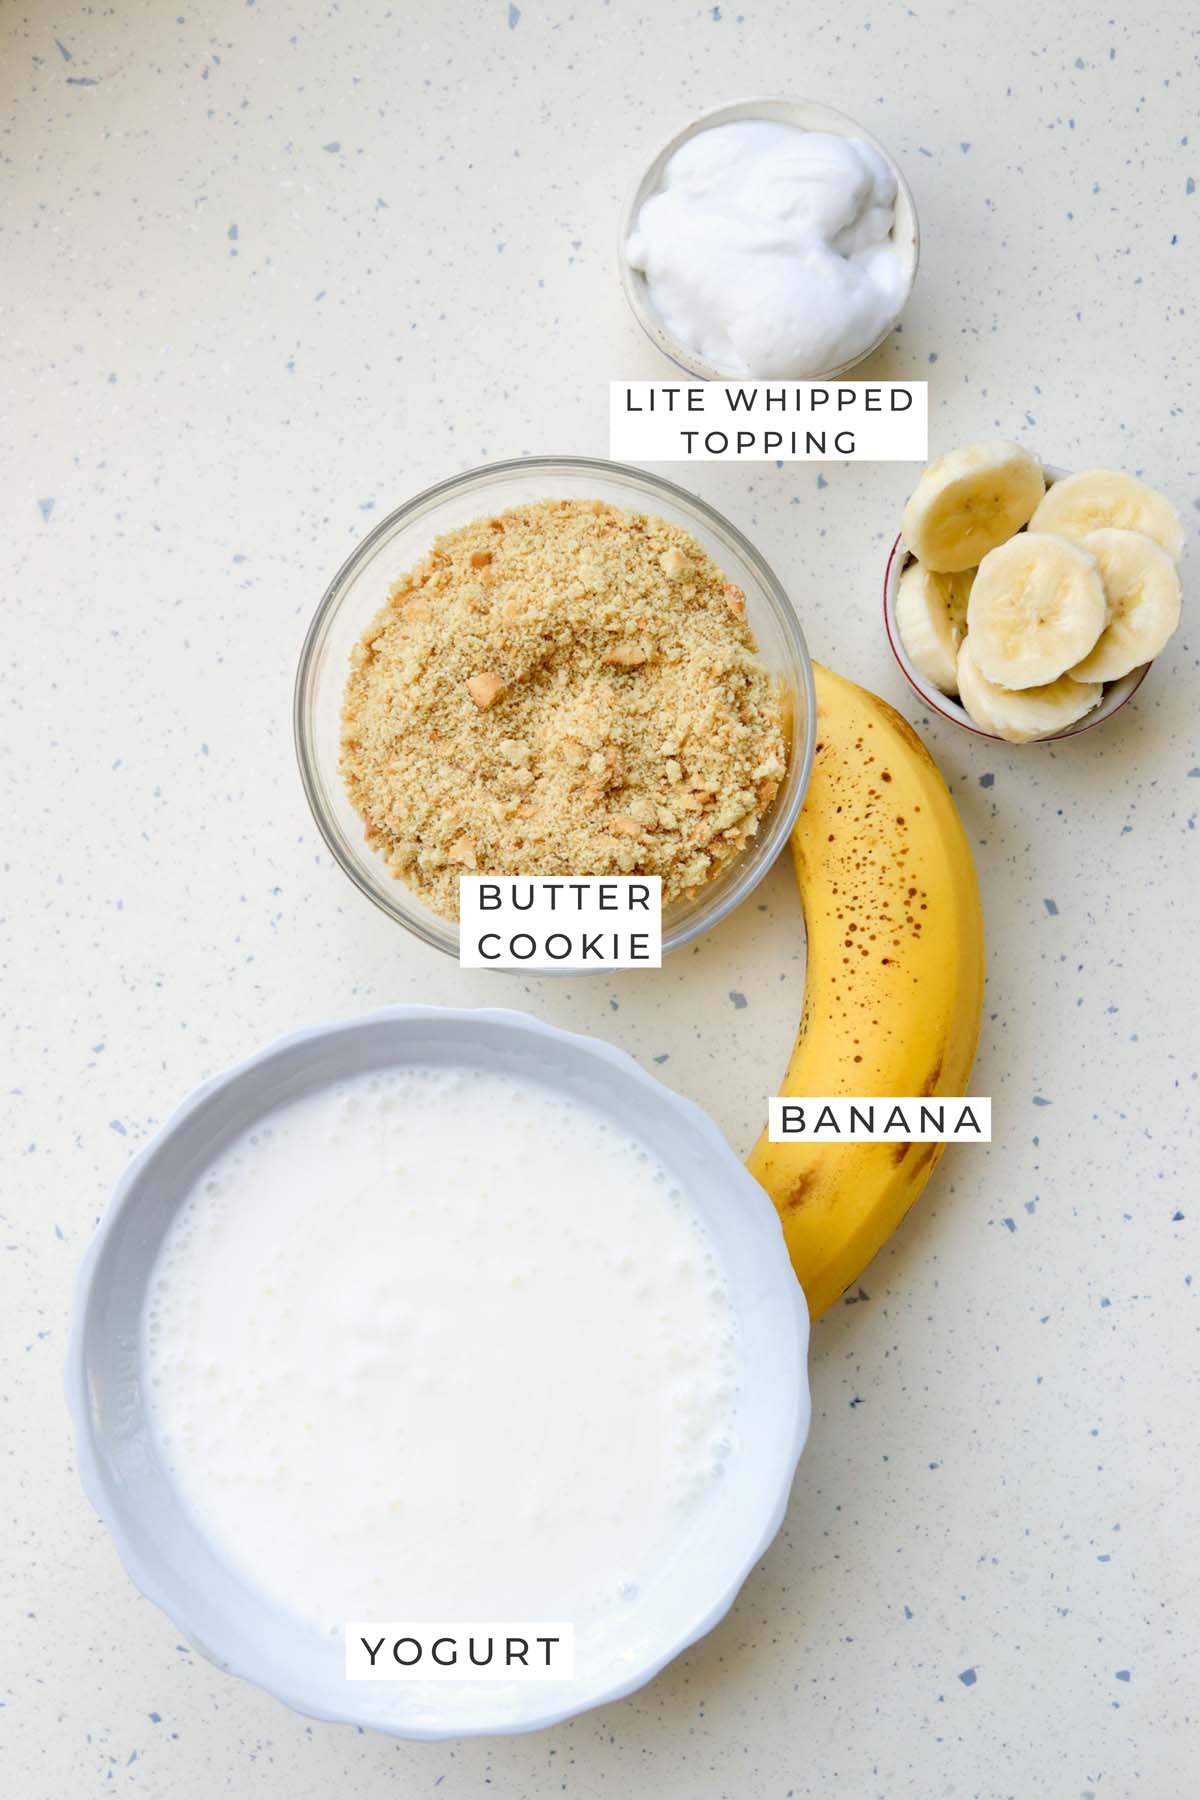 Labeled ingredients for the banana cream pie.